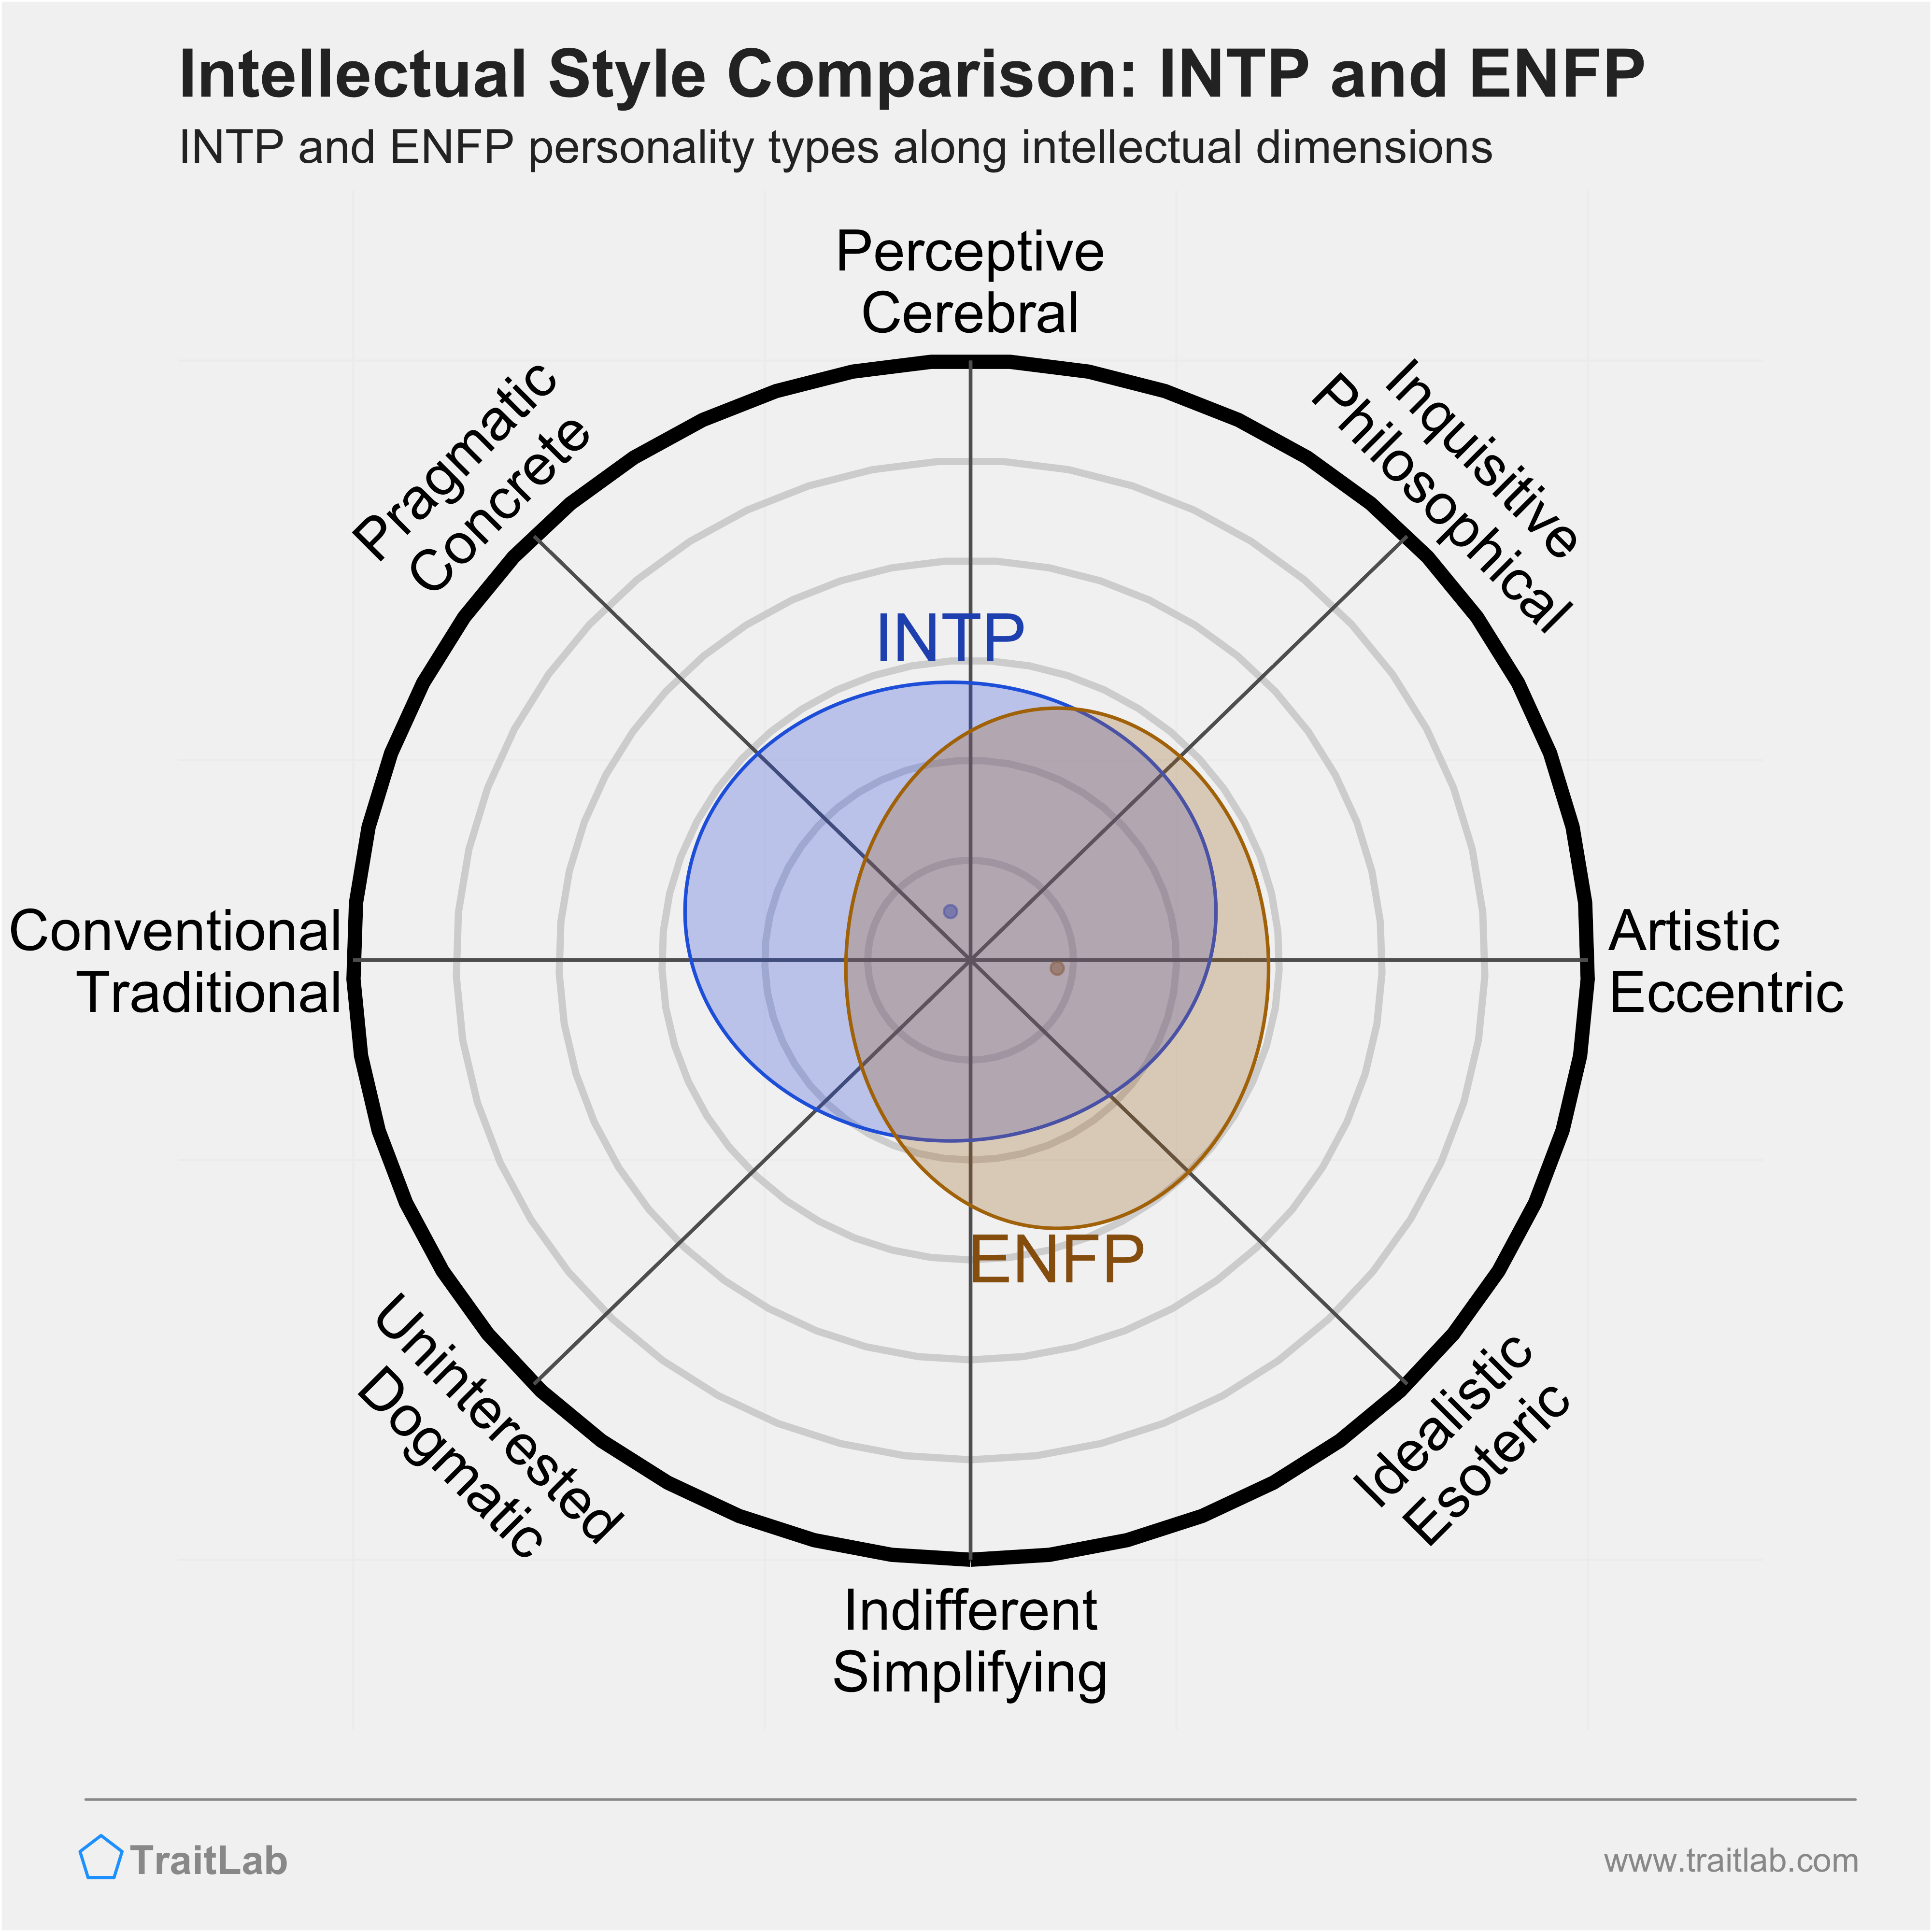 INTP and ENFP comparison across intellectual dimensions